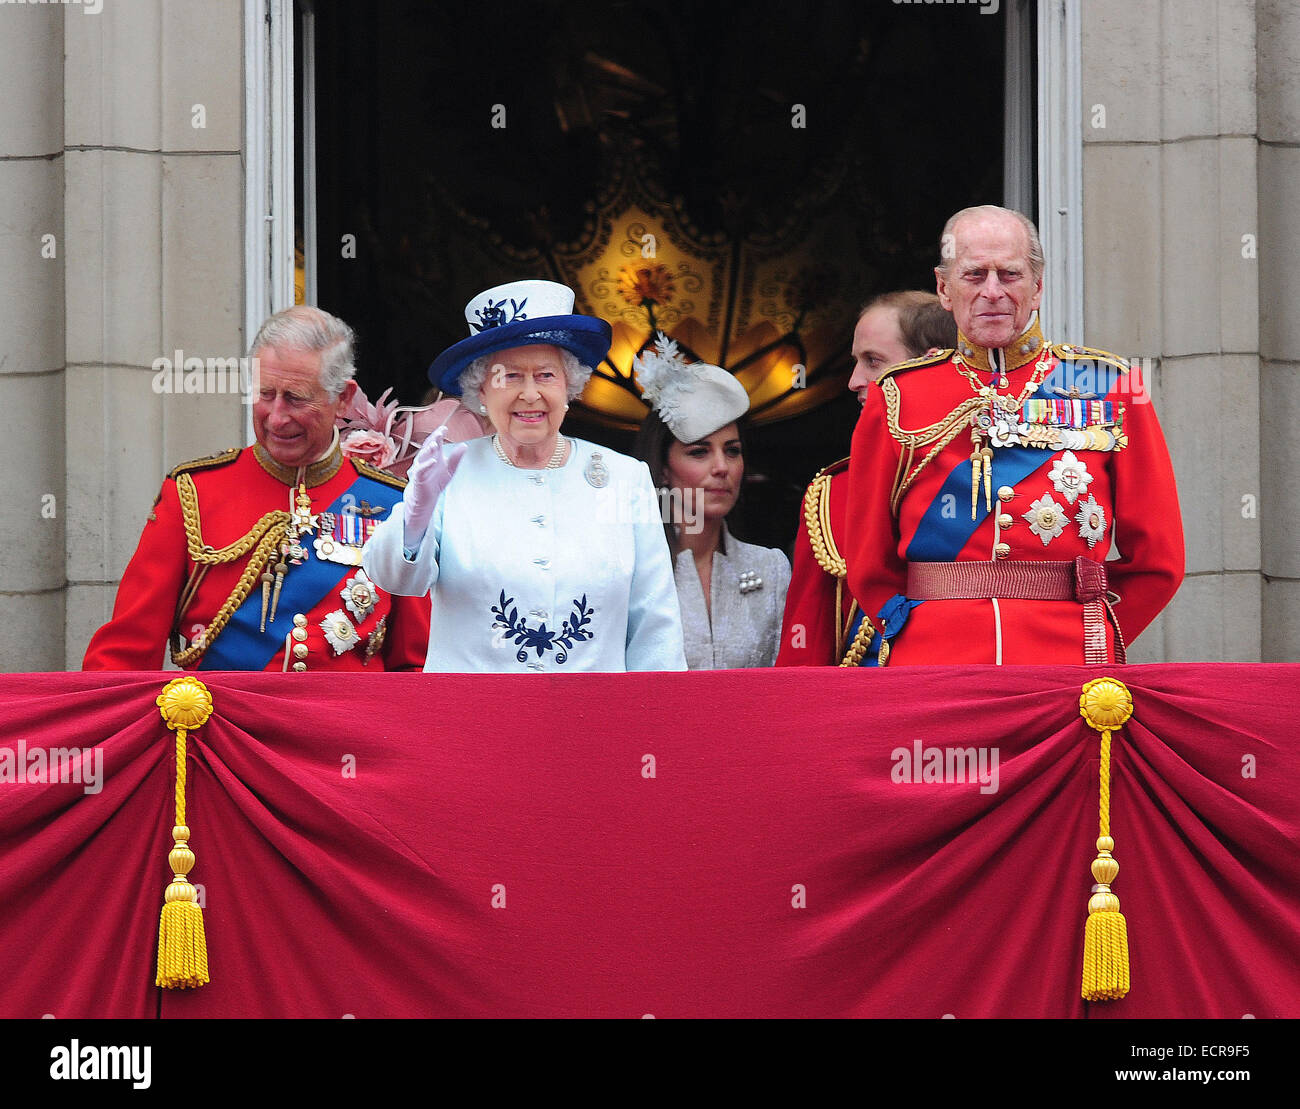 Members of the British Royal family are seen enjoying the Trooping of the Colour Celebrations on the balcony of Buckingham Palace .  Featuring: The Queen,Prince Phillip,Prince Charles Where: LONDON, United Kingdom When: 14 Jun 2014 Stock Photo